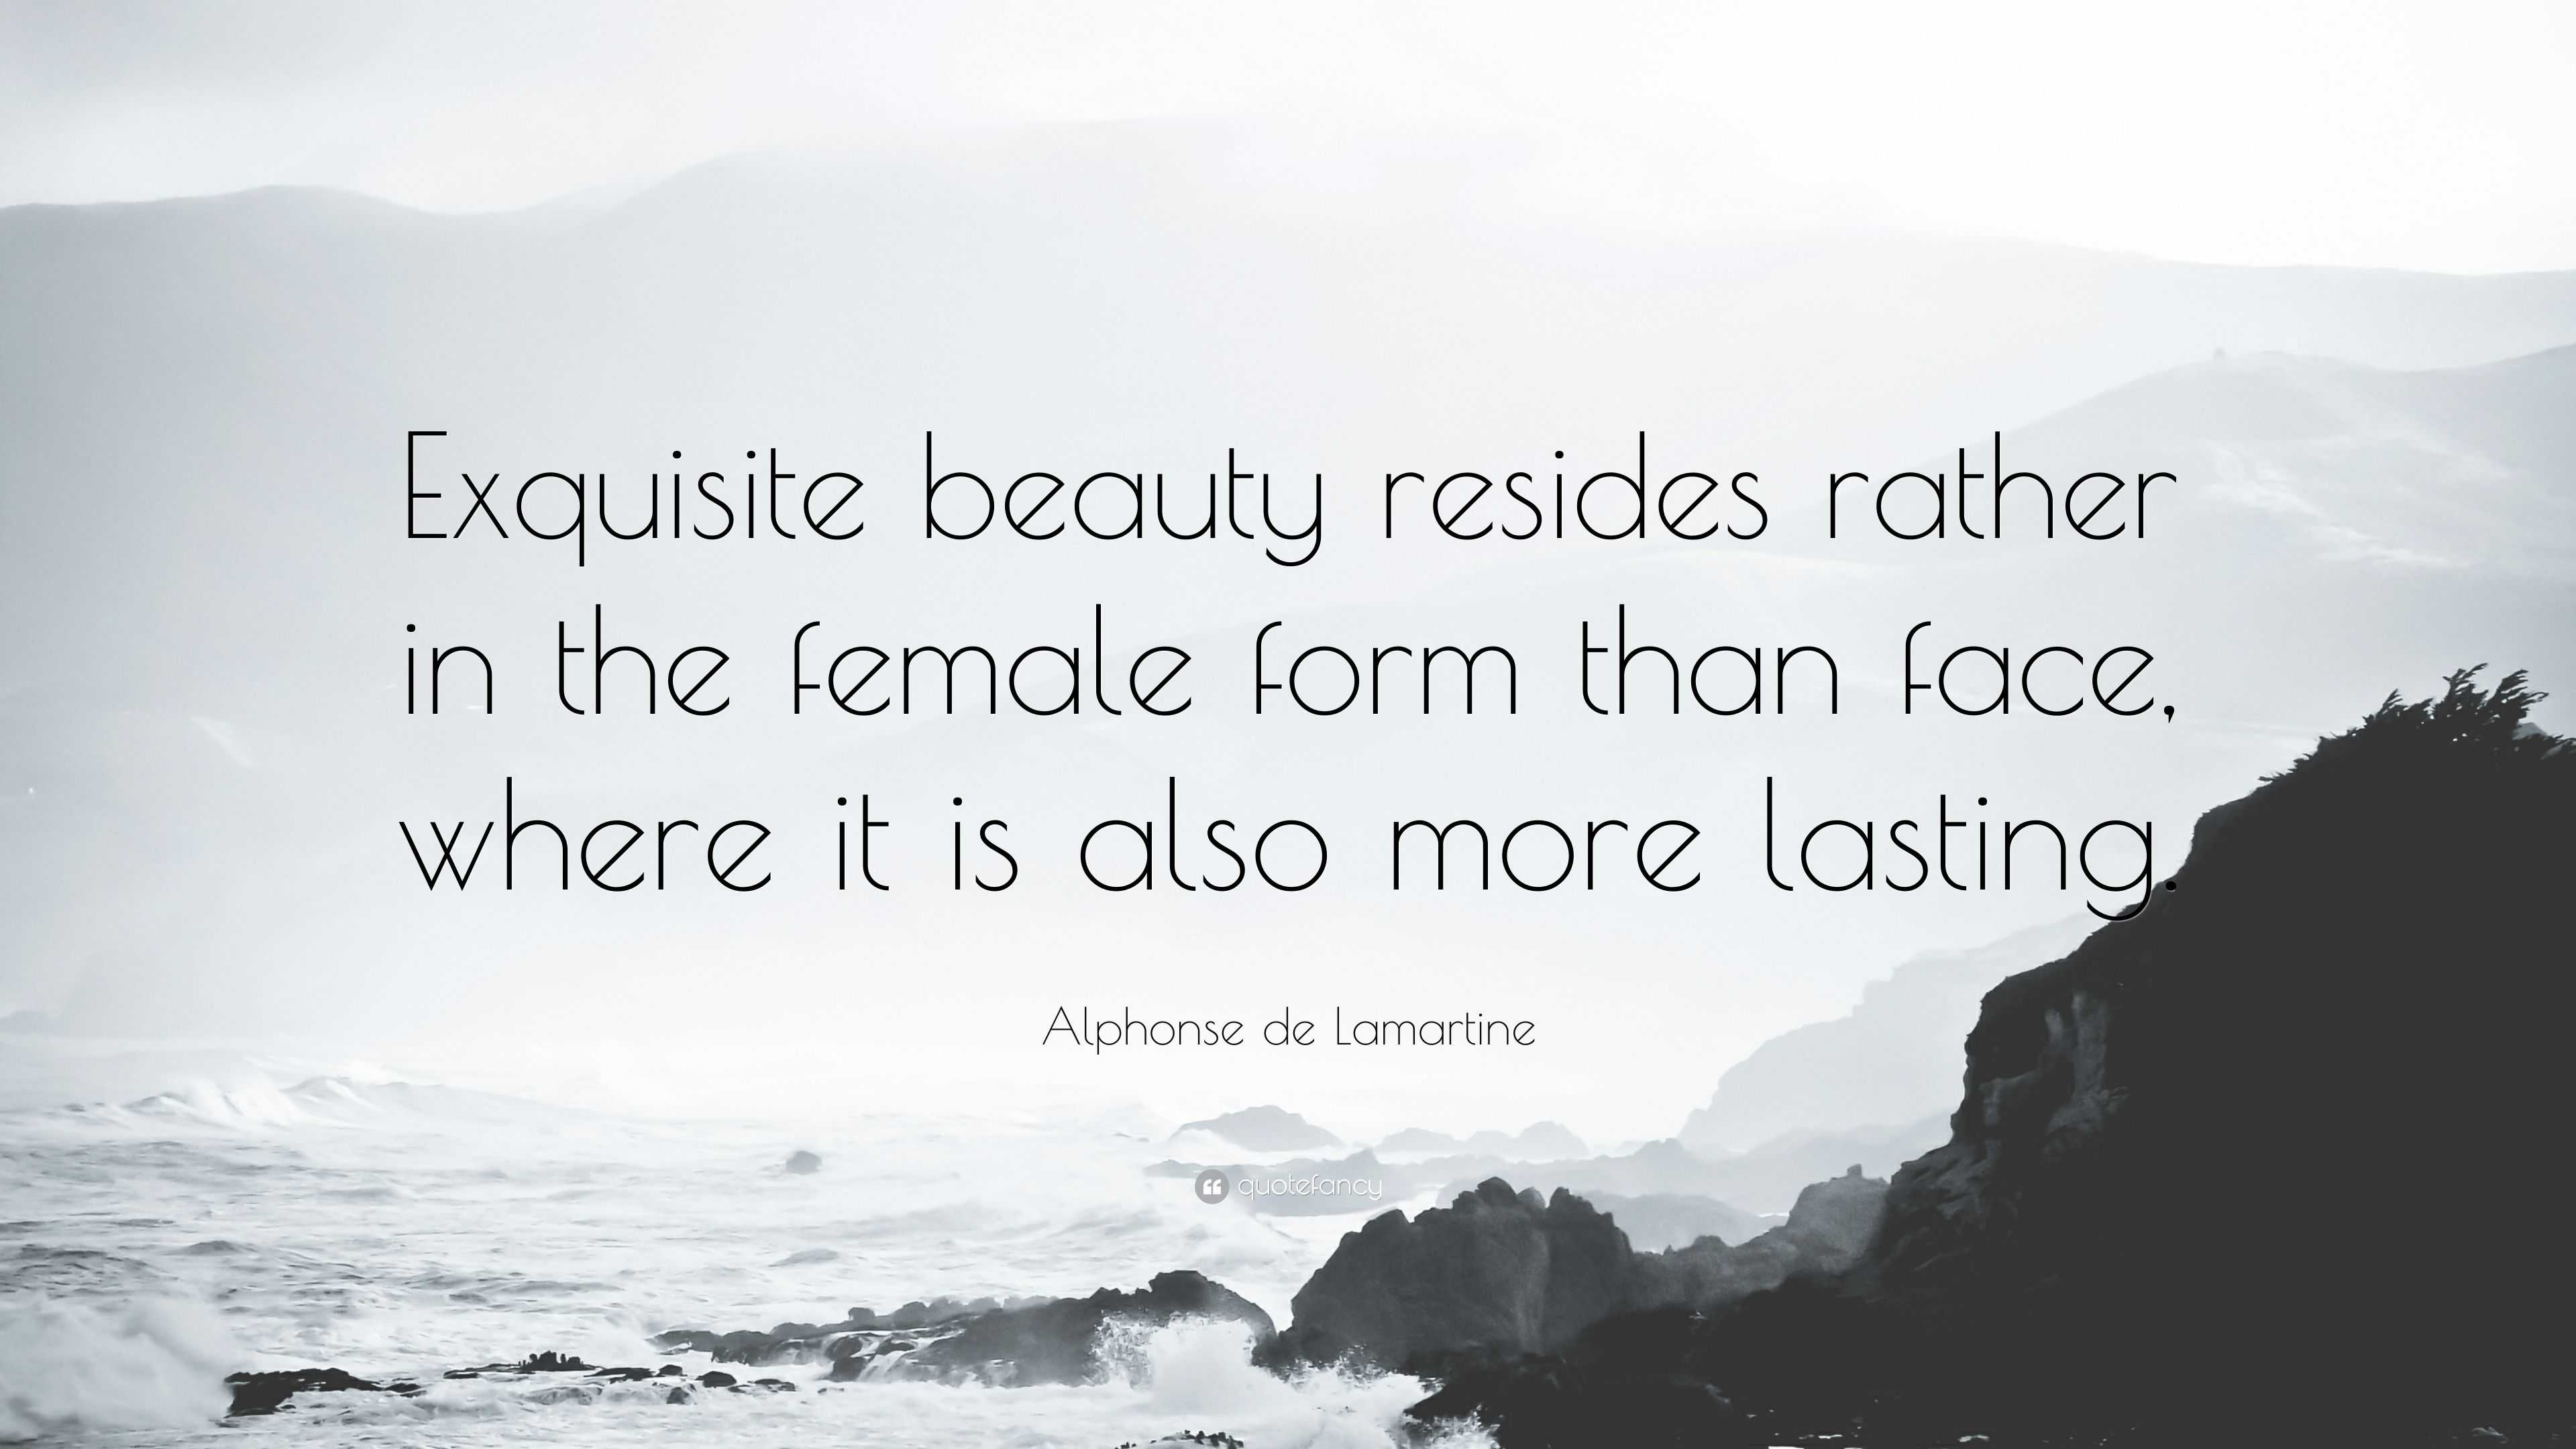 At Jomferry, we firmly believe that every woman's beauty deserves